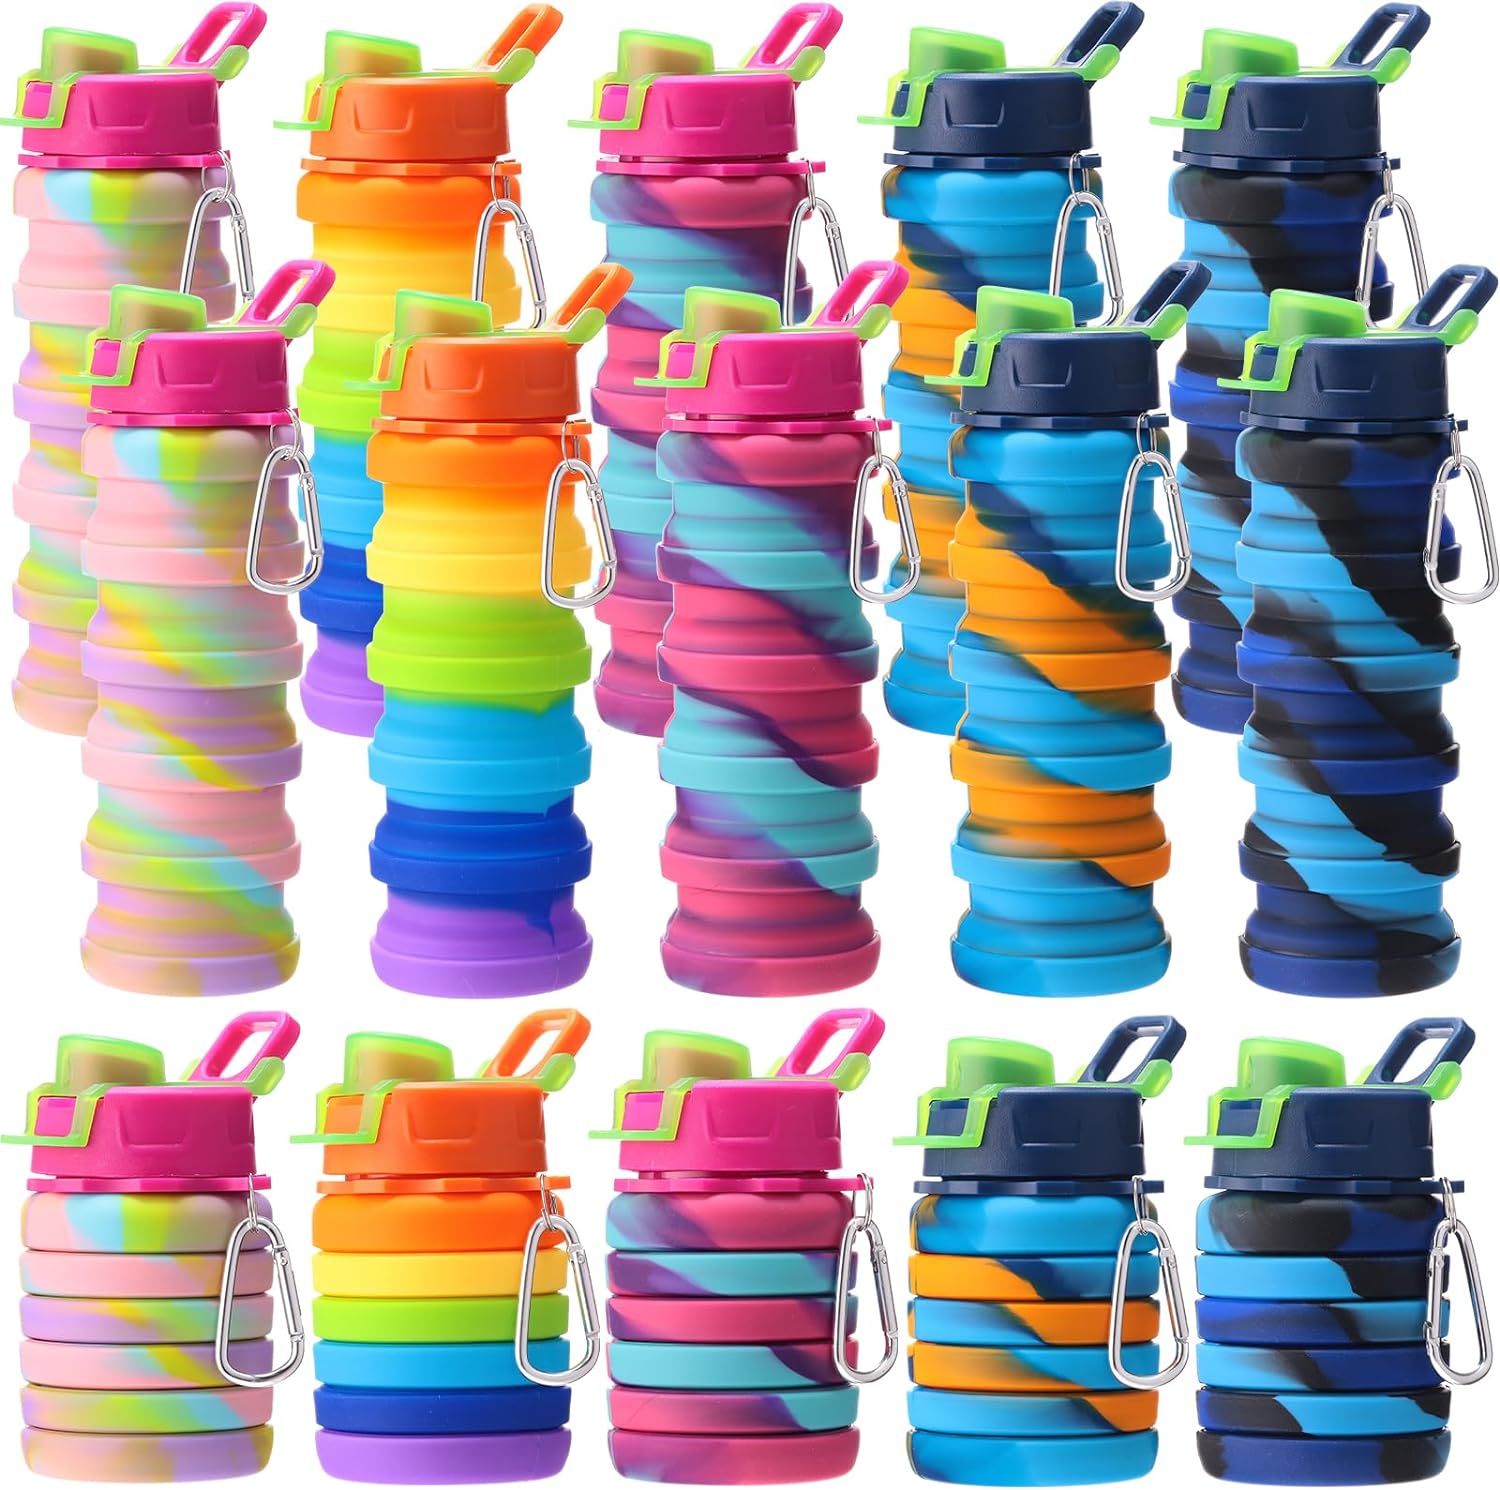 Umigy 10 Pack 17 oz Foldable Water Bottles Portable Collapsible Water Bottles Leak Proof Collapse Water Bottles for Travel Sports Cups for Outdoor Activities Hiking Camping